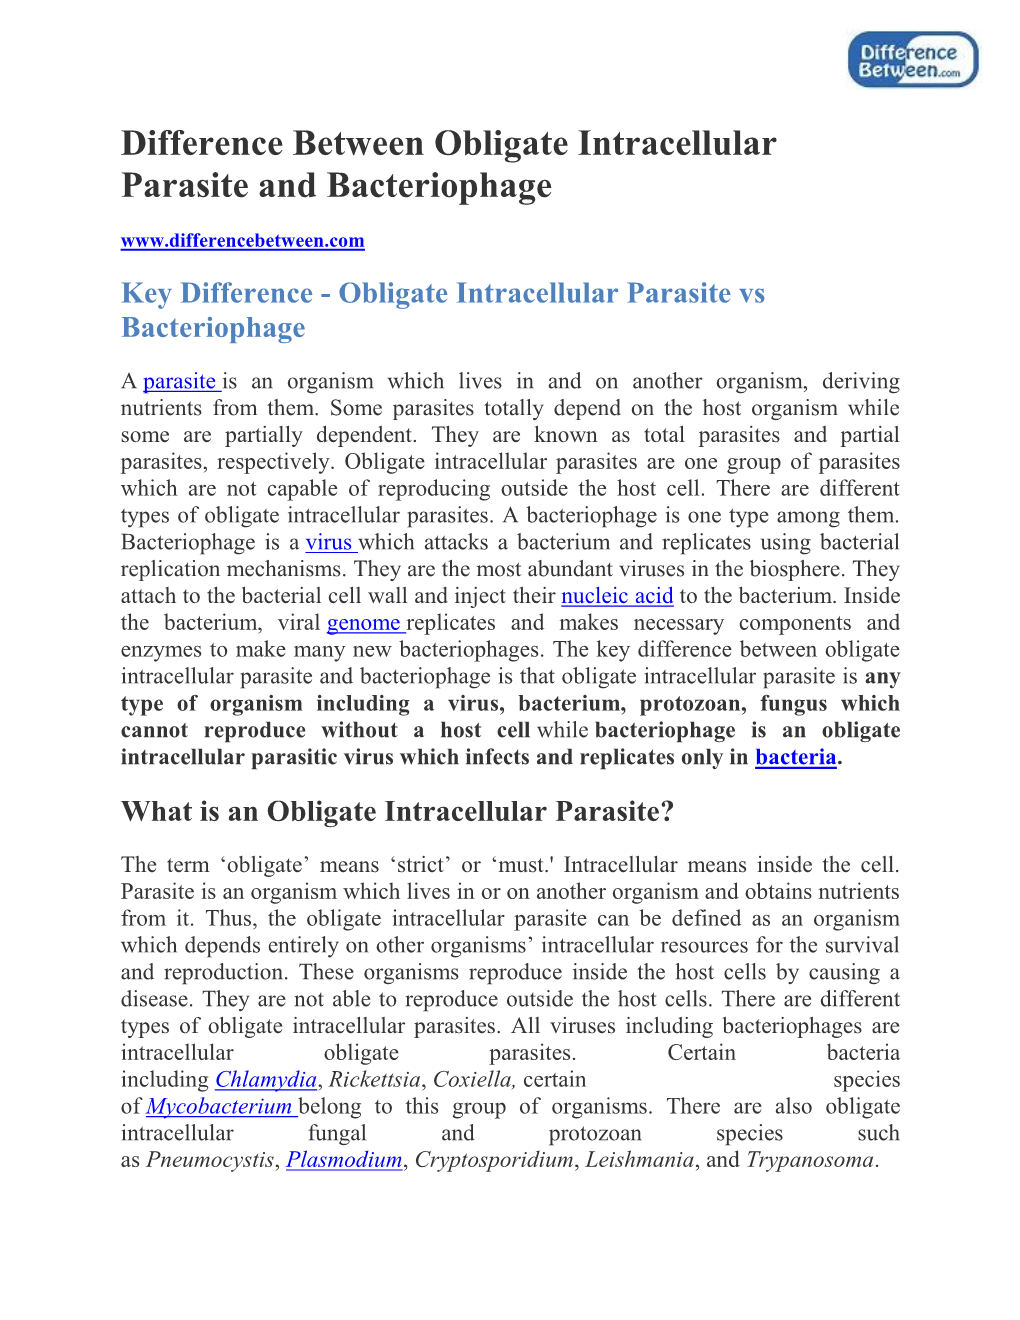 Difference Between Obligate Intracellular Parasite and Bacteriophage Key Difference - Obligate Intracellular Parasite Vs Bacteriophage